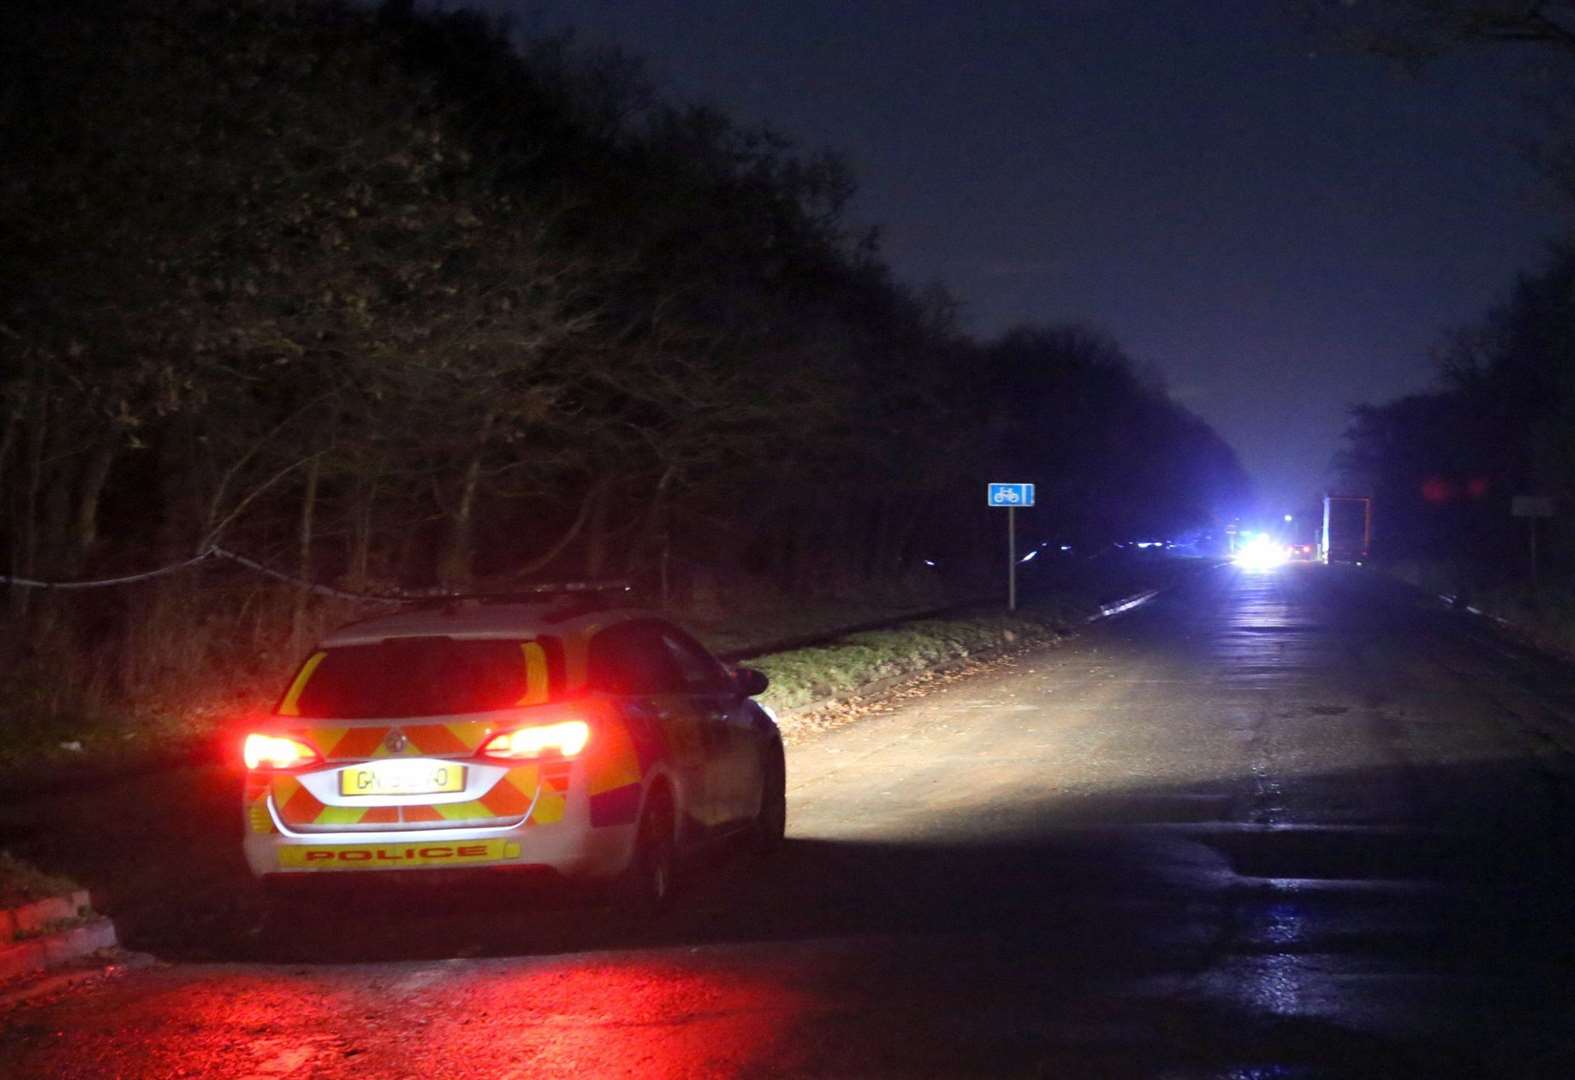 The picture shows the police tape stretching all the way along the wooded area and path (Picture: UKNIP)